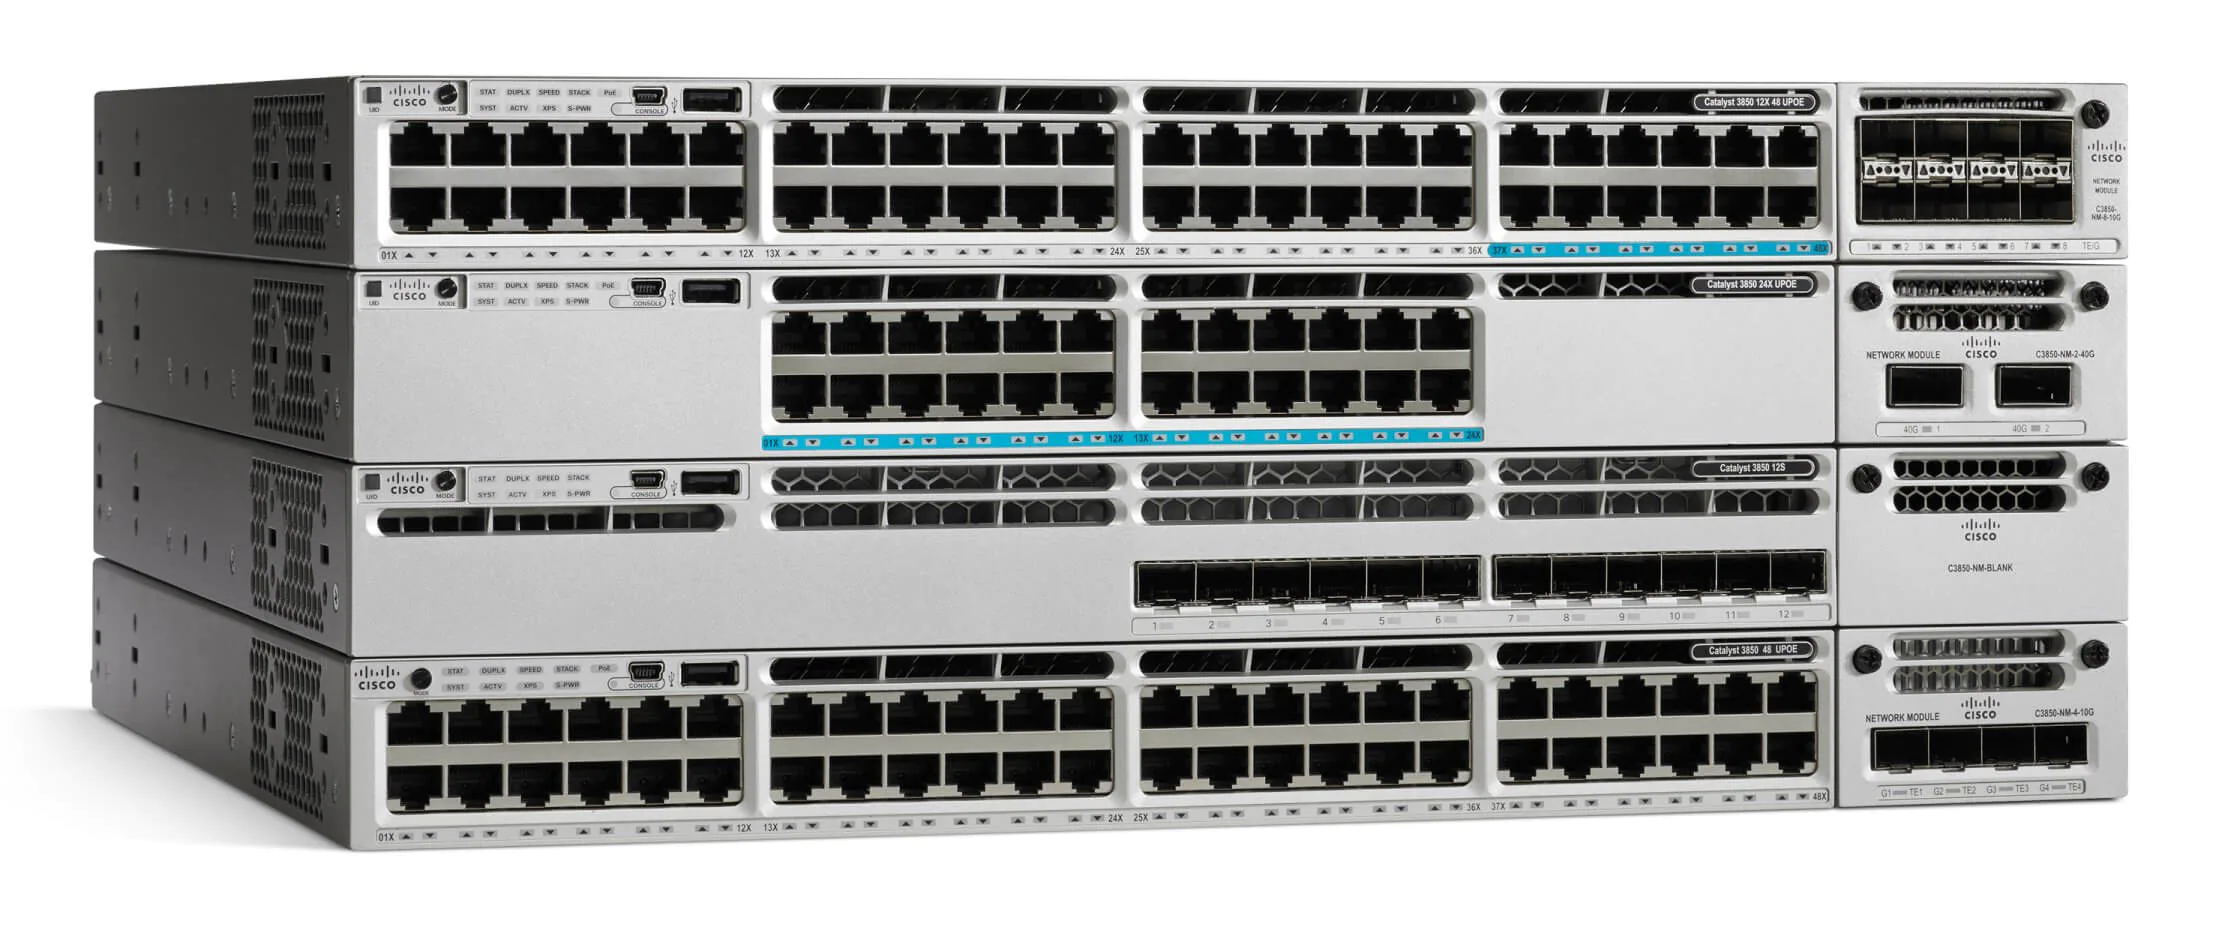 What is Cisco Switch Catalyst 3850?